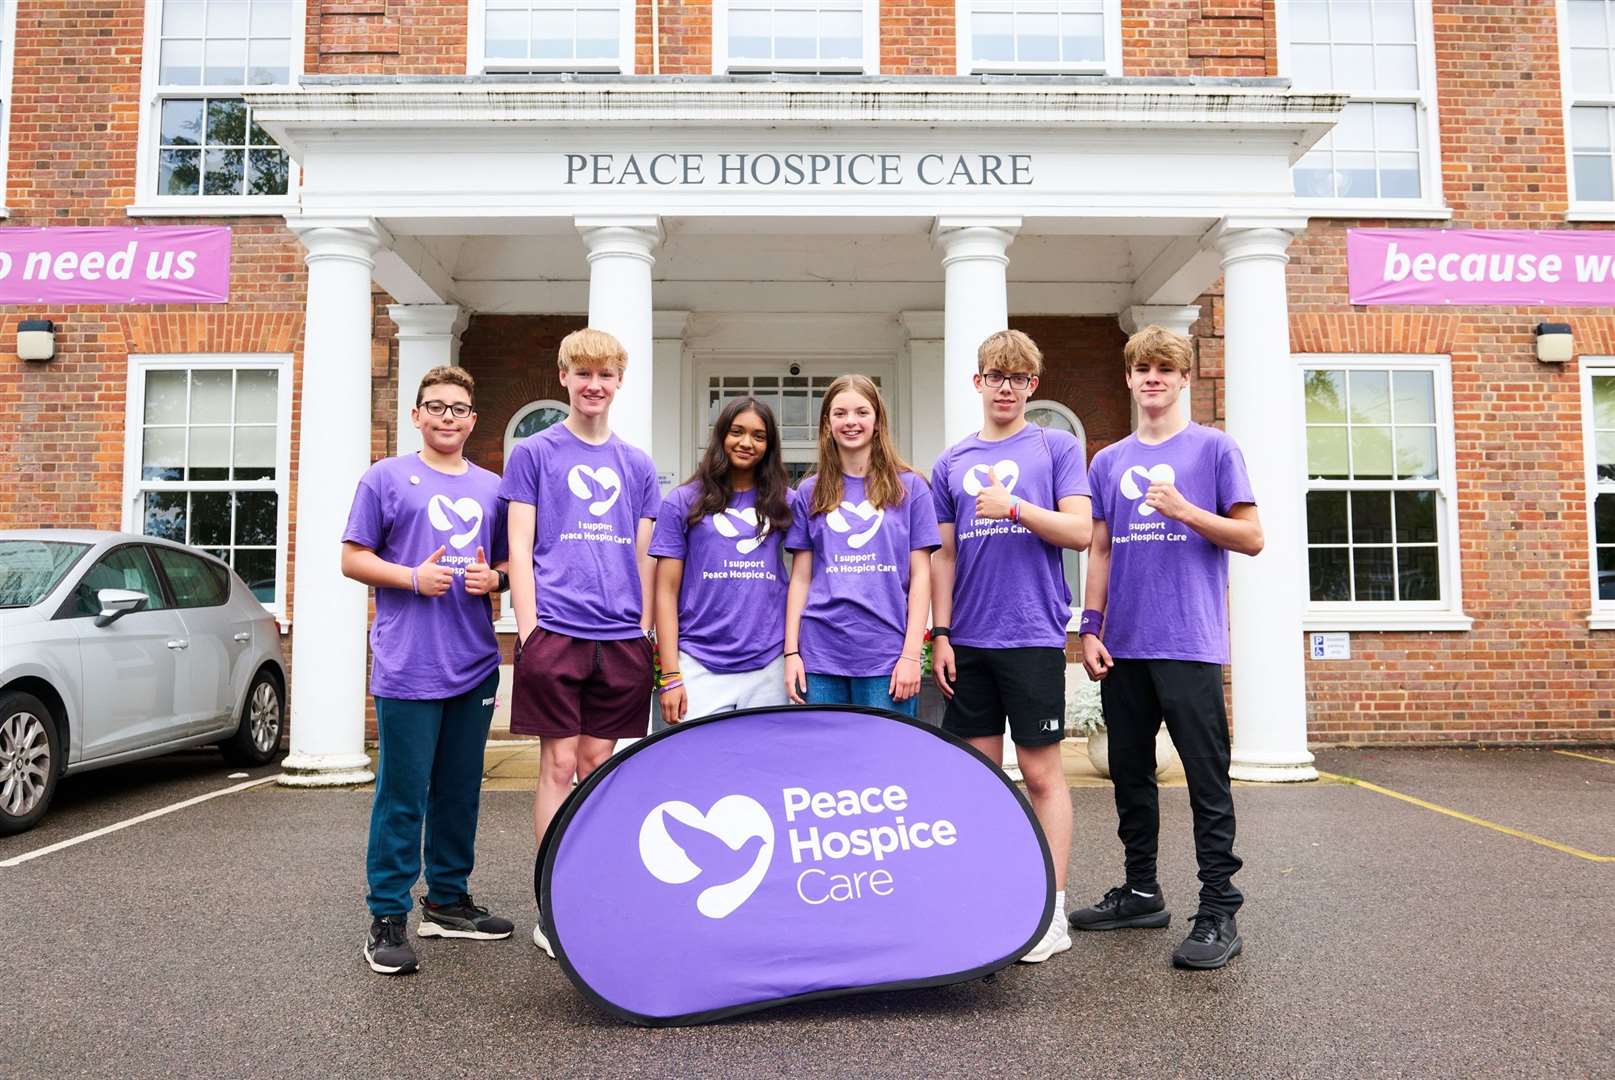 Rennie Grove Peace Hospice Care and the swimming team standing together (Paul Meyler Photographer)